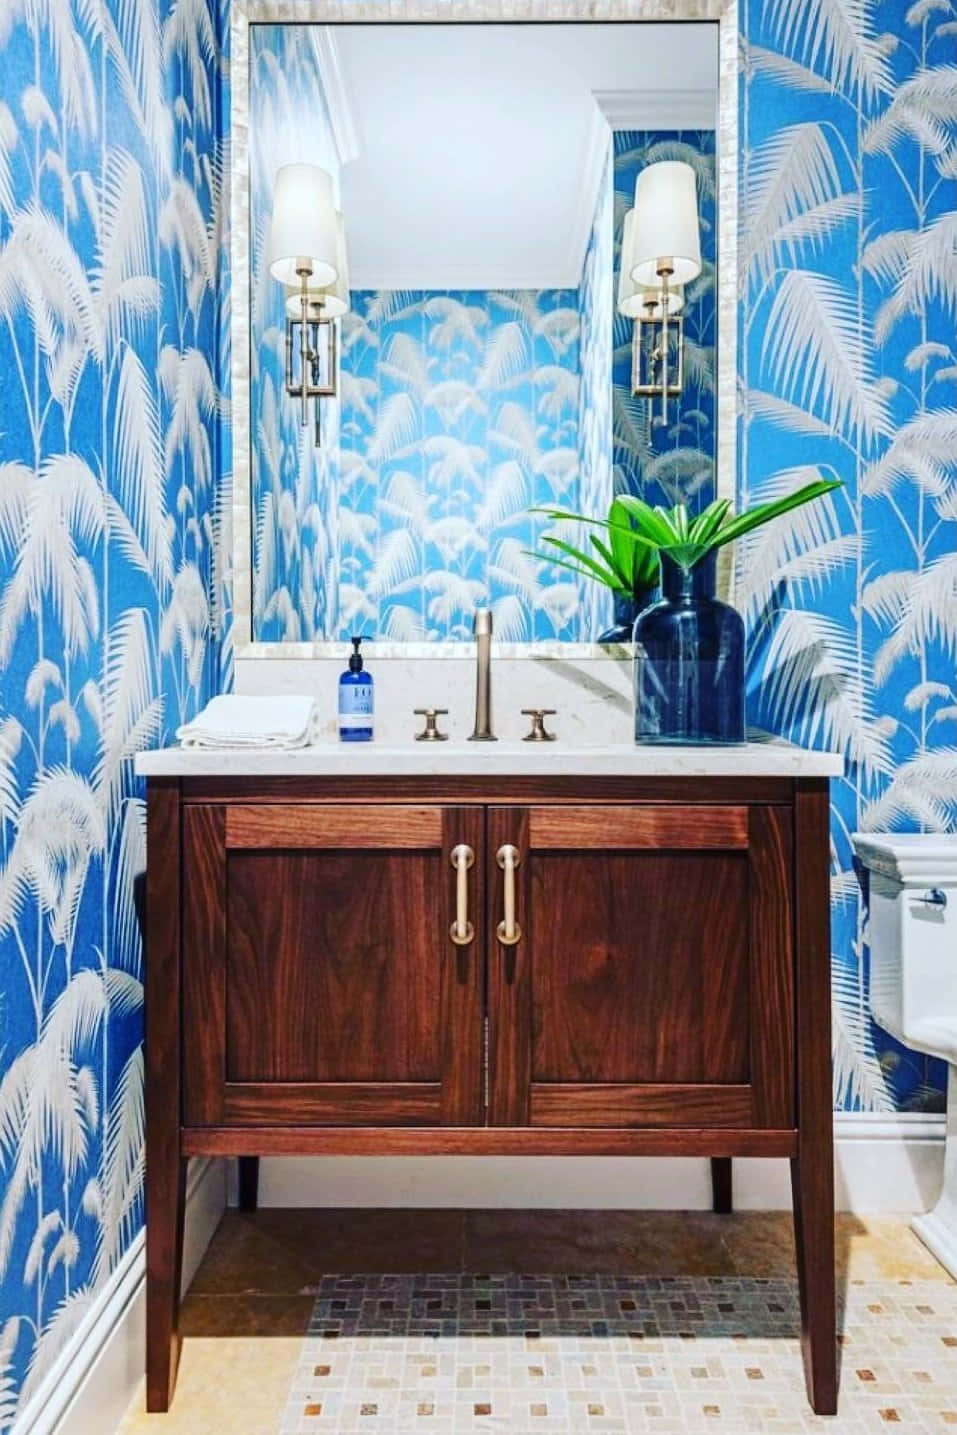 A Sumptuous Blue And White Bathroom With Feather Patterned Wall